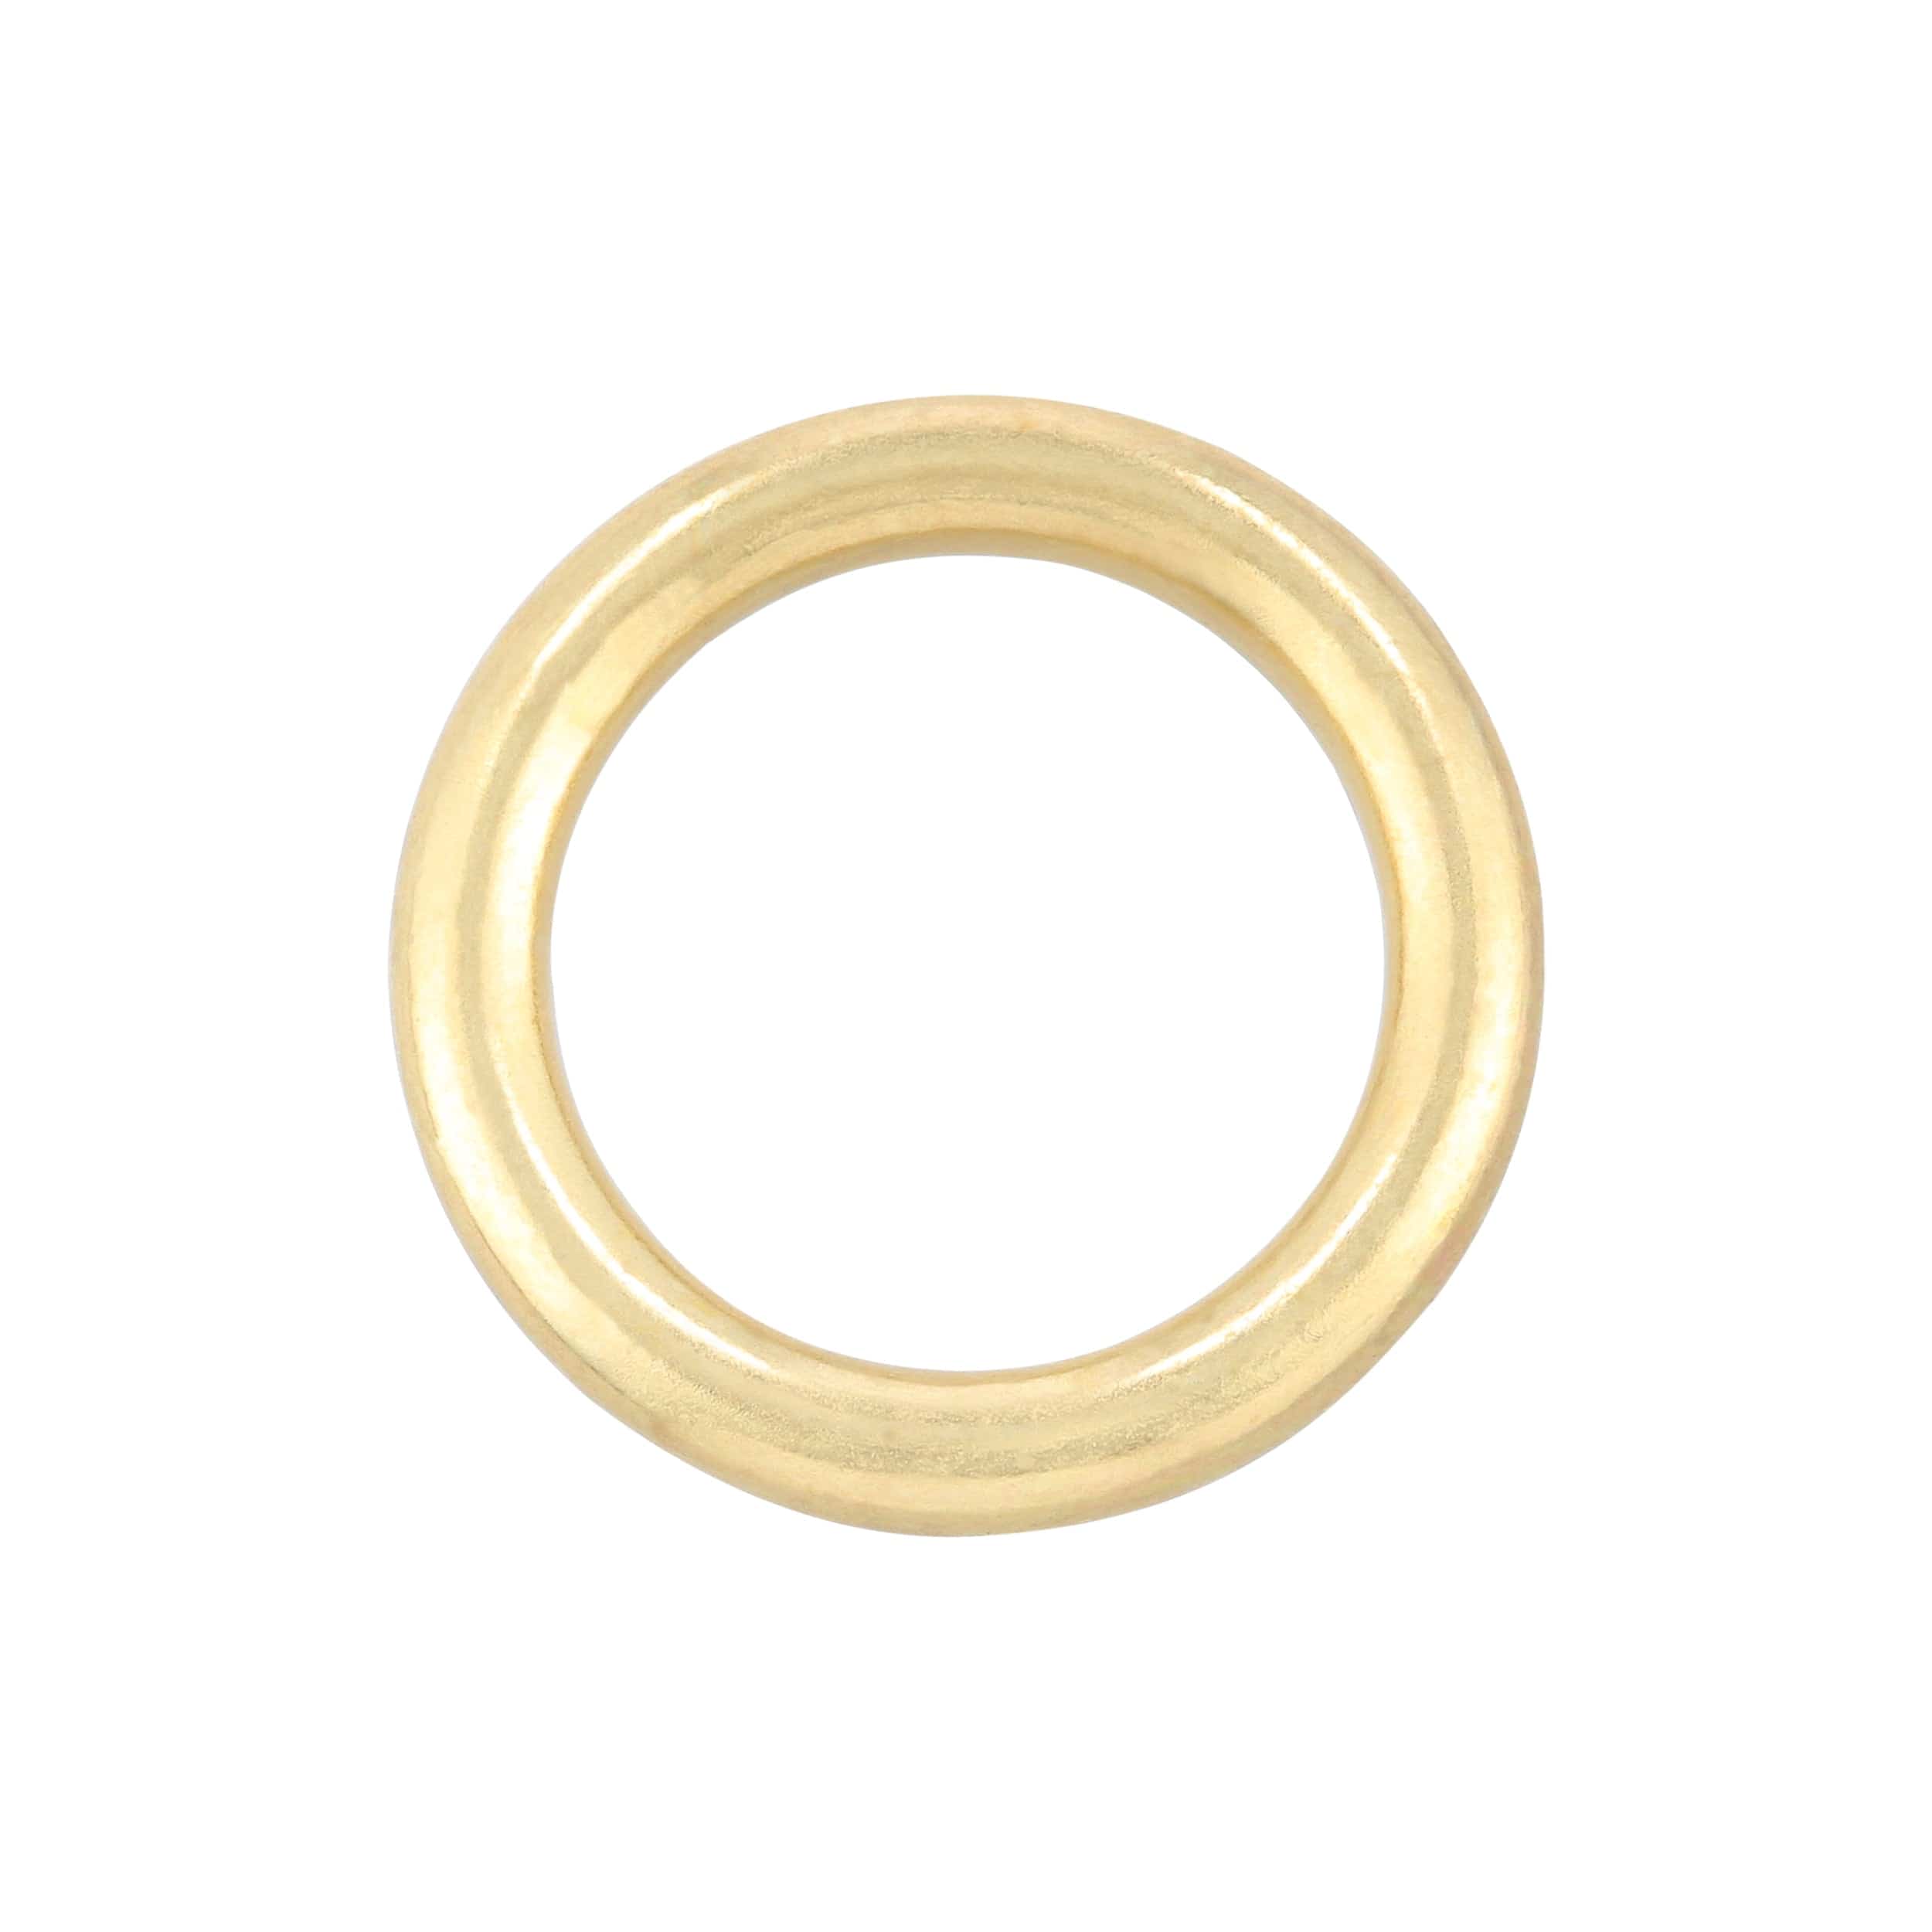 Ohio Travel Bag Rings & Slides 5/8" Brass, Solid Round Ring, Zinc Alloy, #A-231-BP A-231-BP